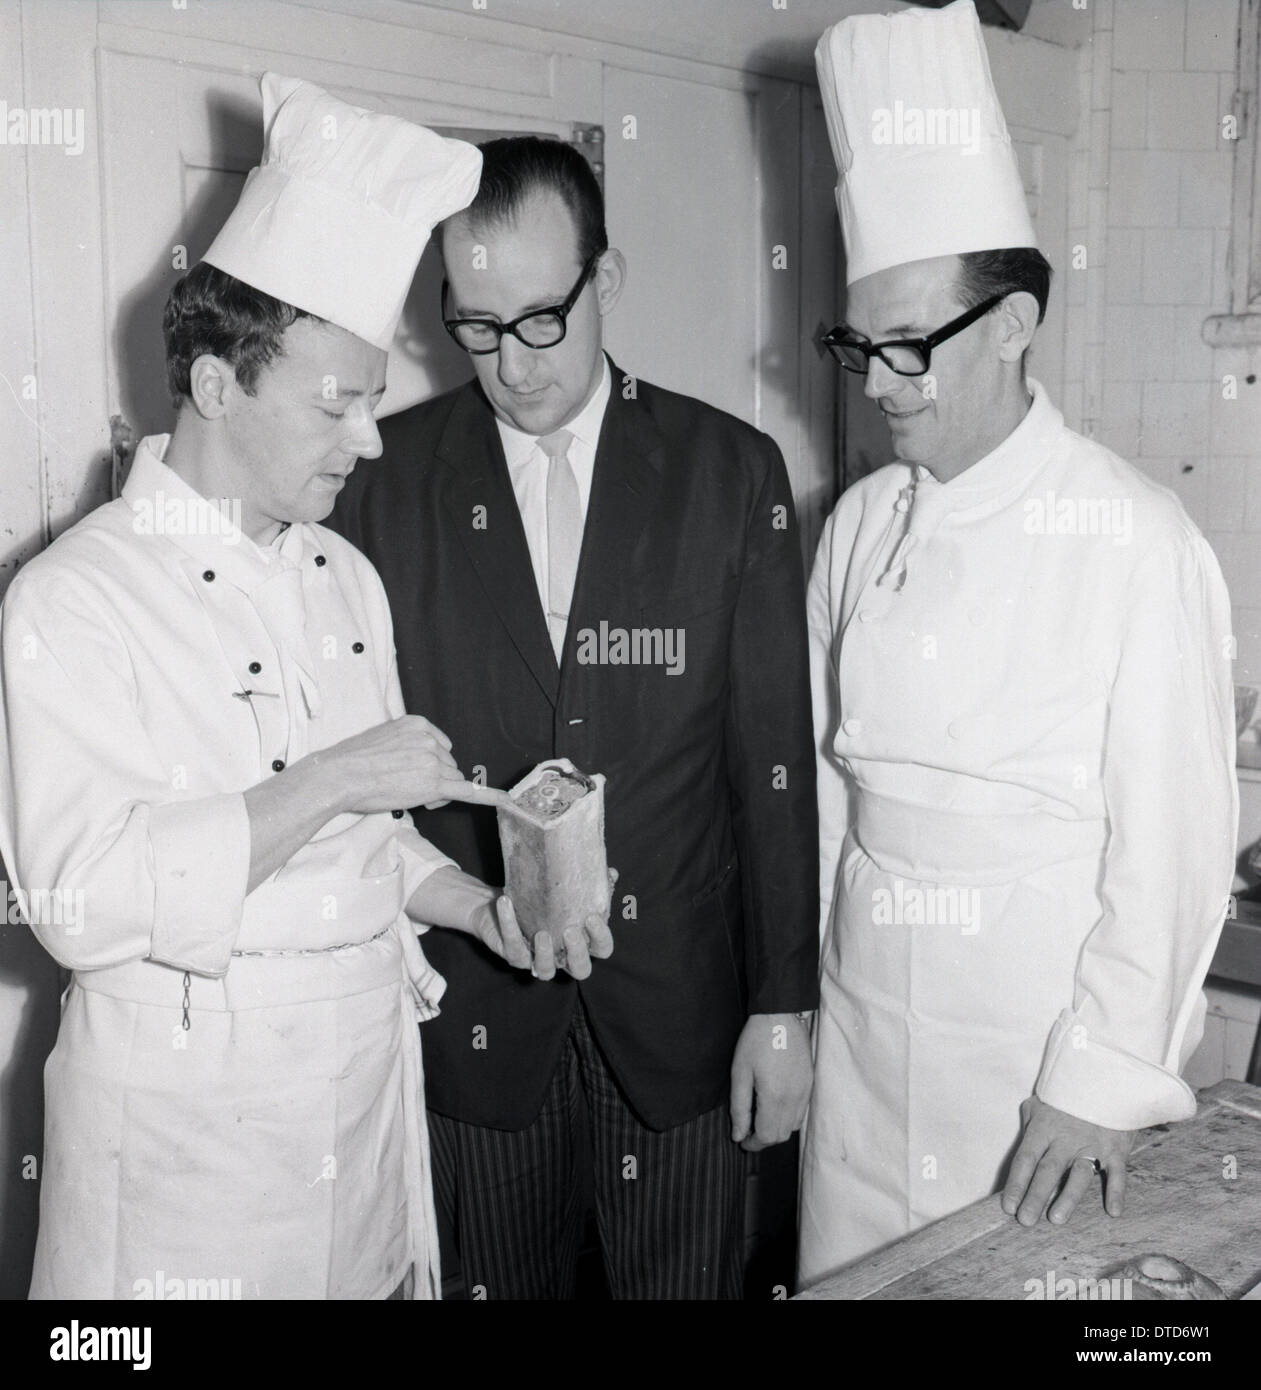 1960s. Historical image showing two professional chefs in a kitchen in conversation with a hotel maitre d' about a food item. Stock Photo